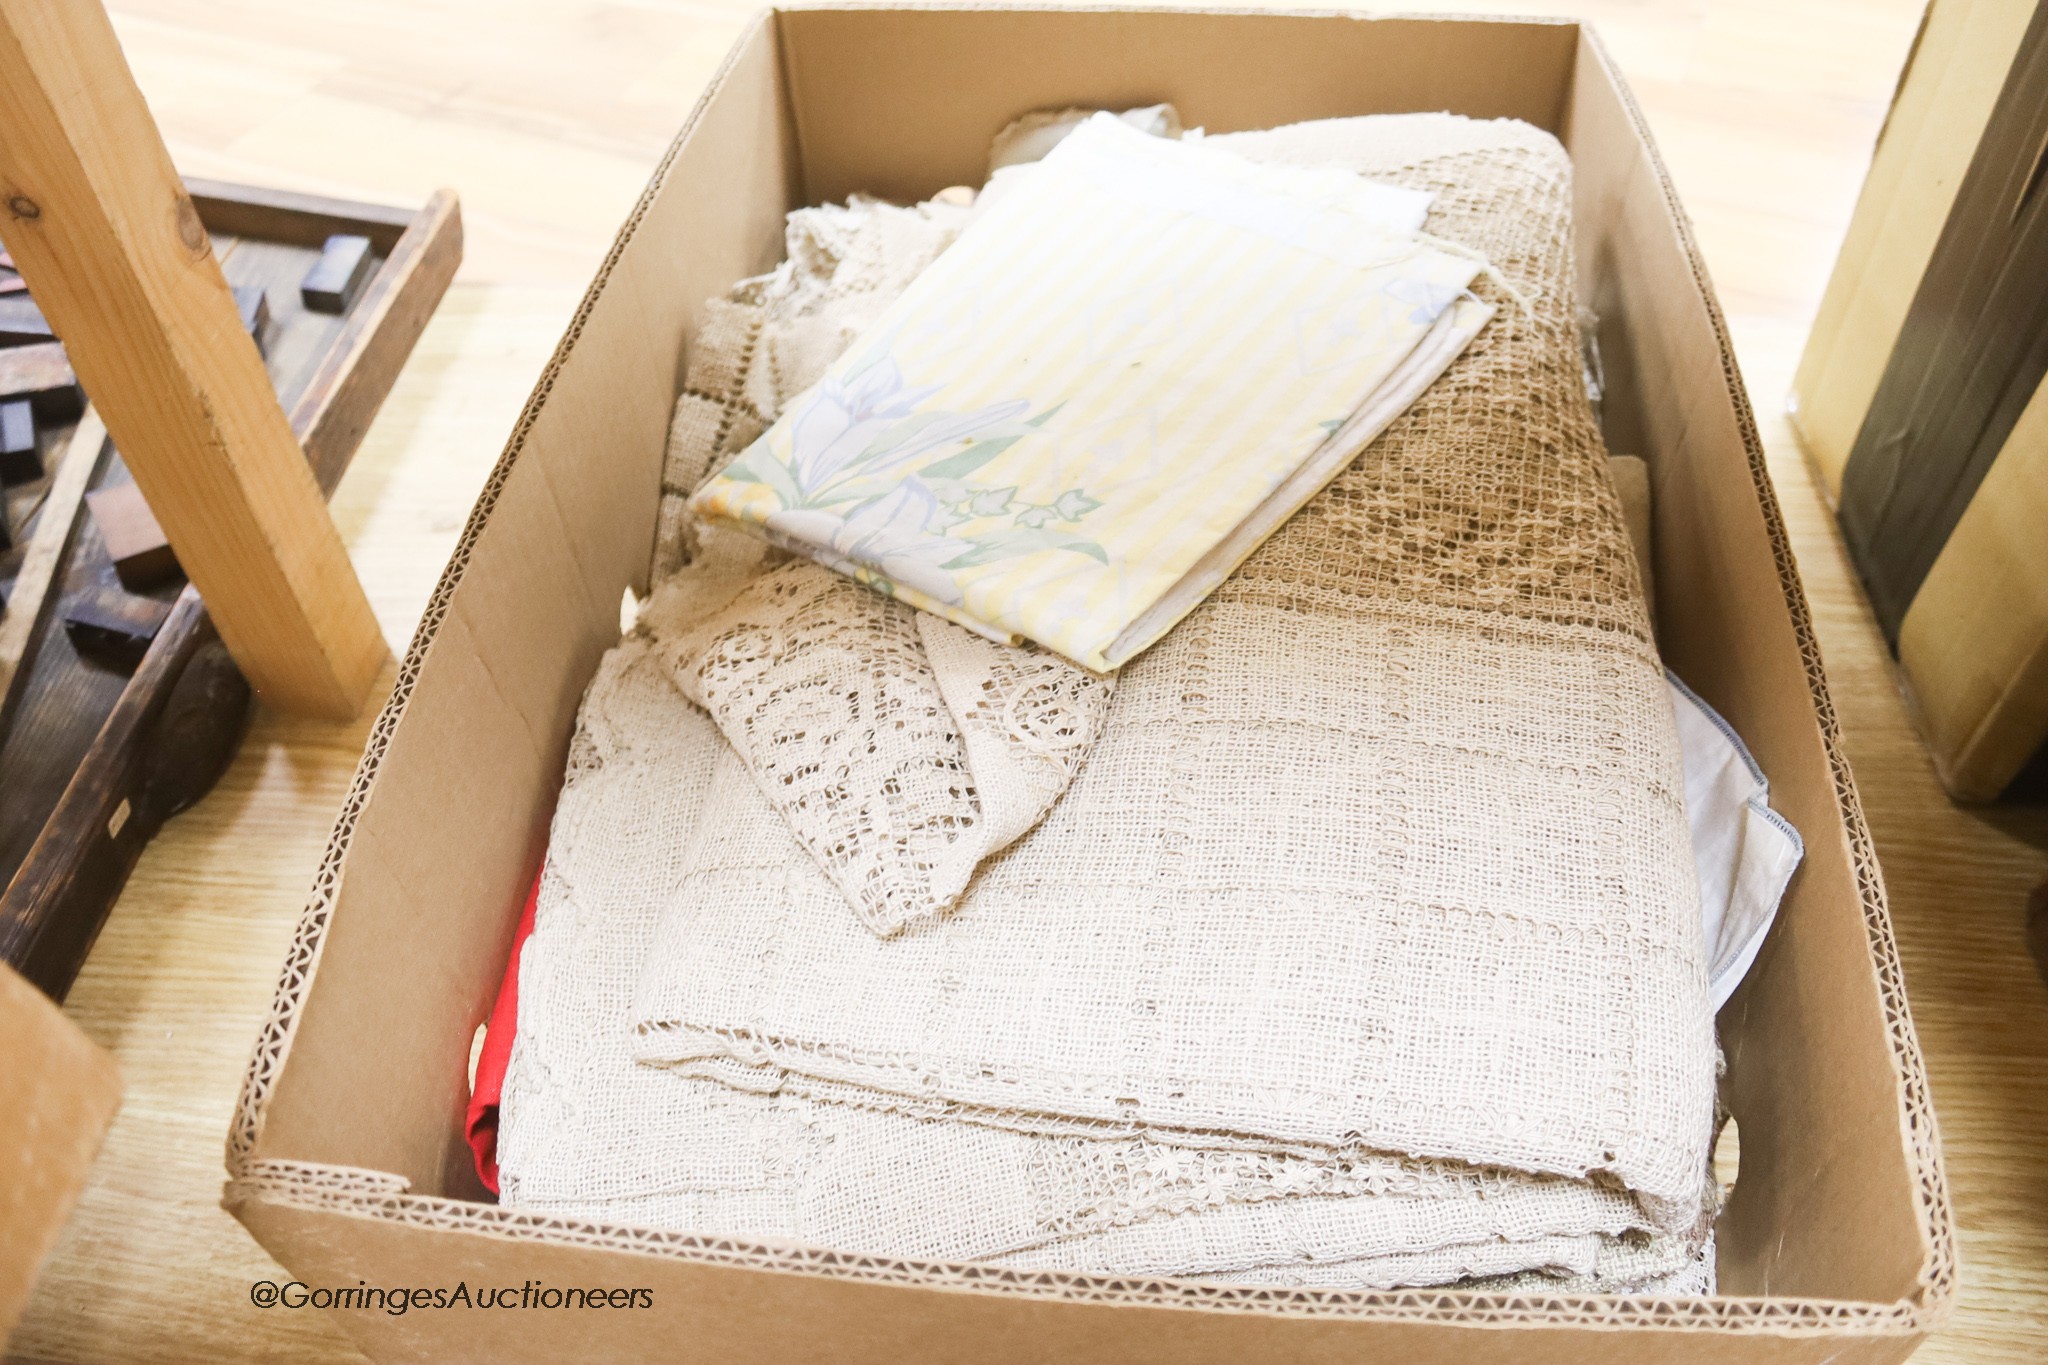 Two boxes of mixed tablecloths